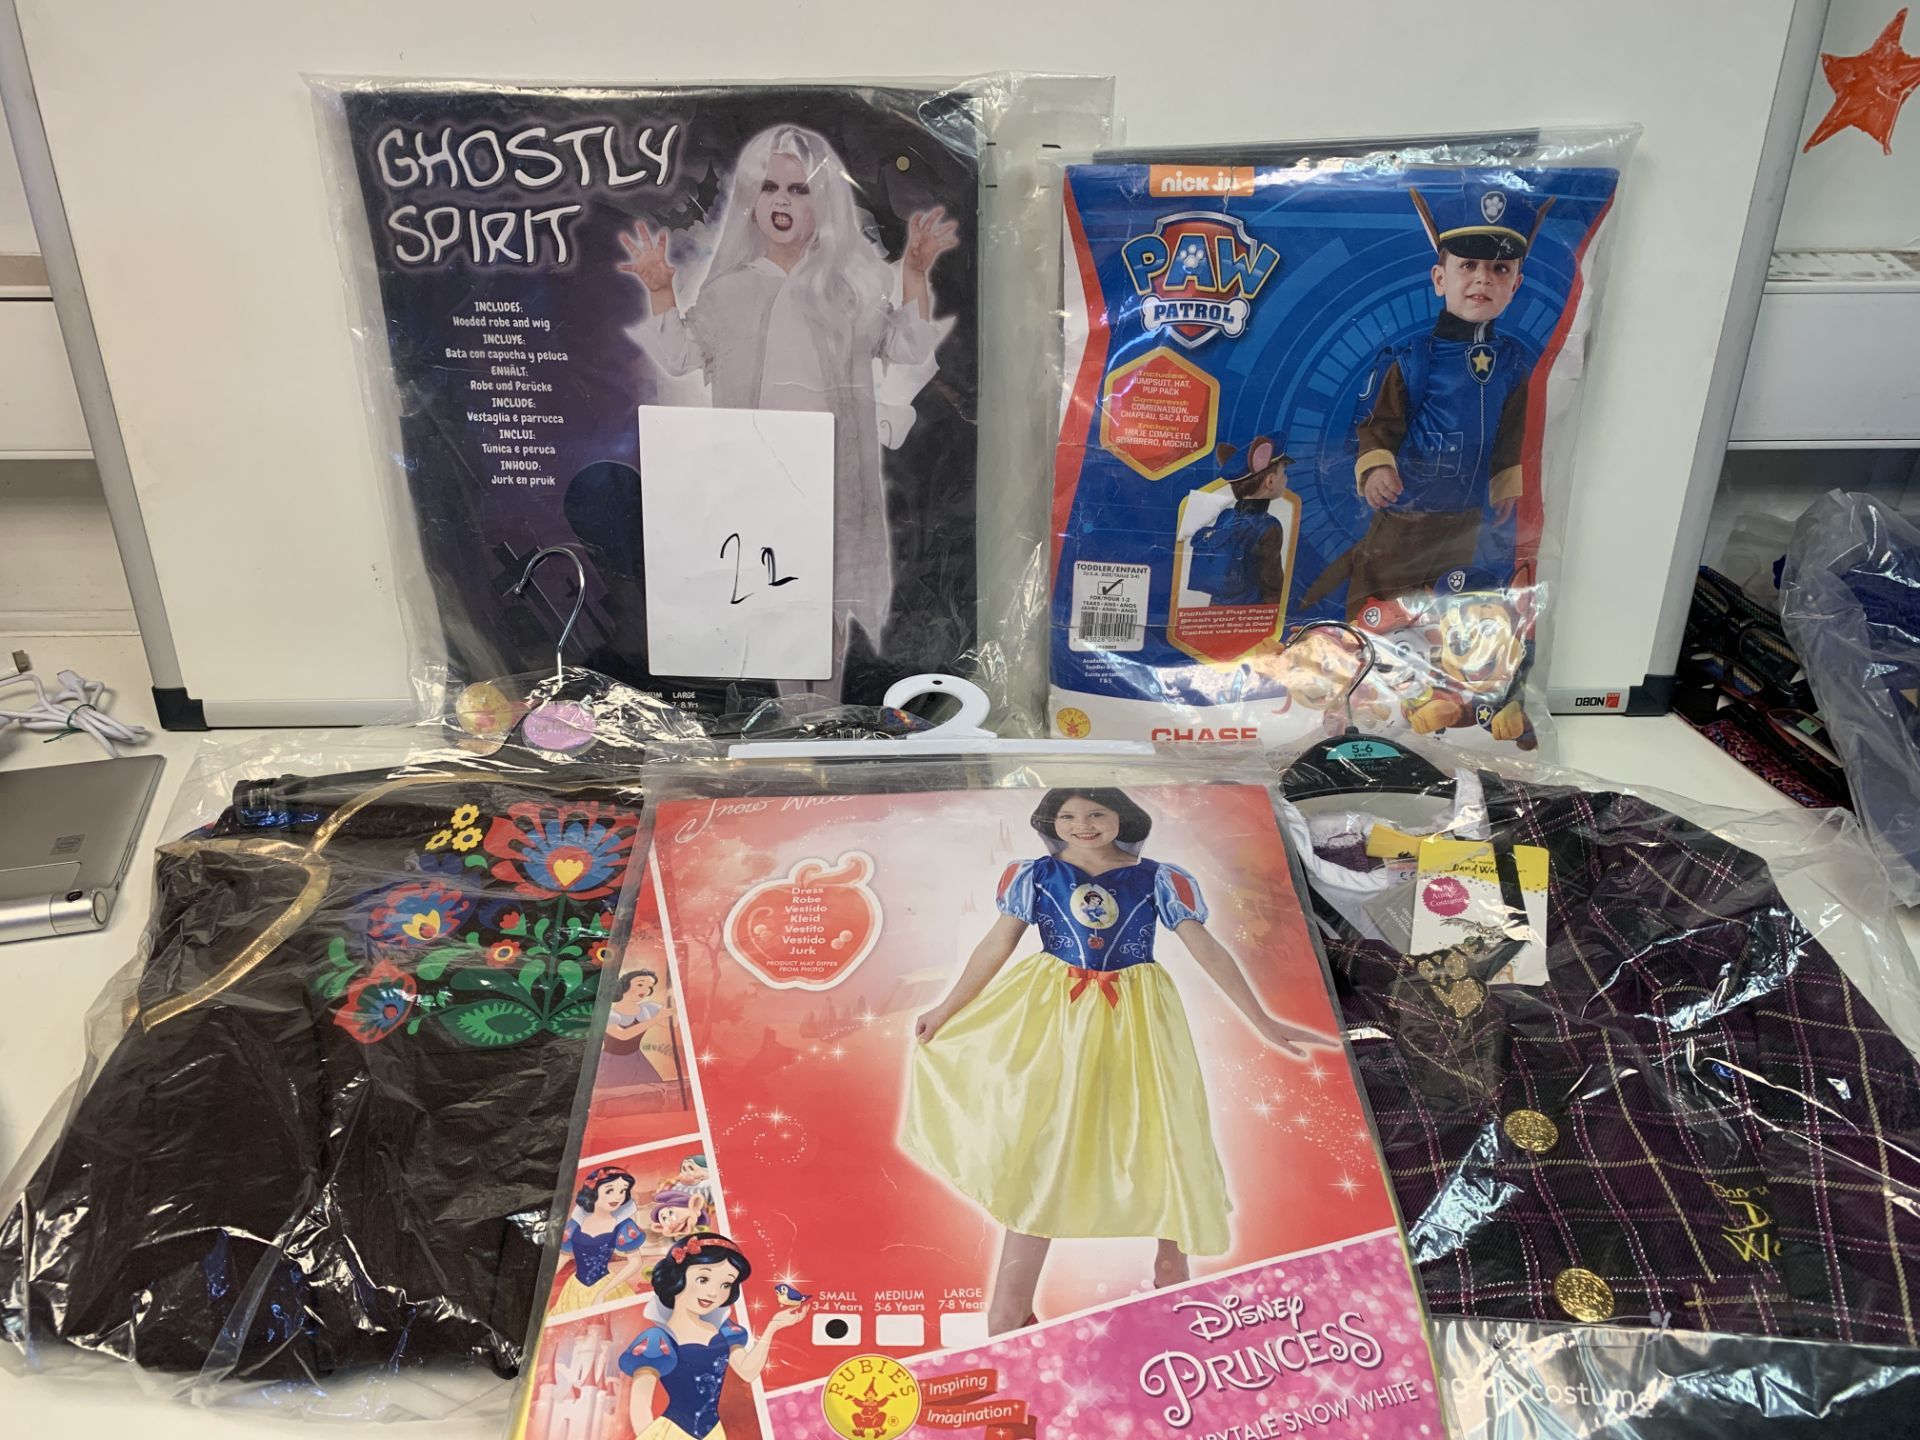 15 X BRAND NEW ASSORTED CHILDRENS FANCY DRESS OUTFITS INCLUDING DISNEY PRINCESS, PAW PATROL ETC FROM